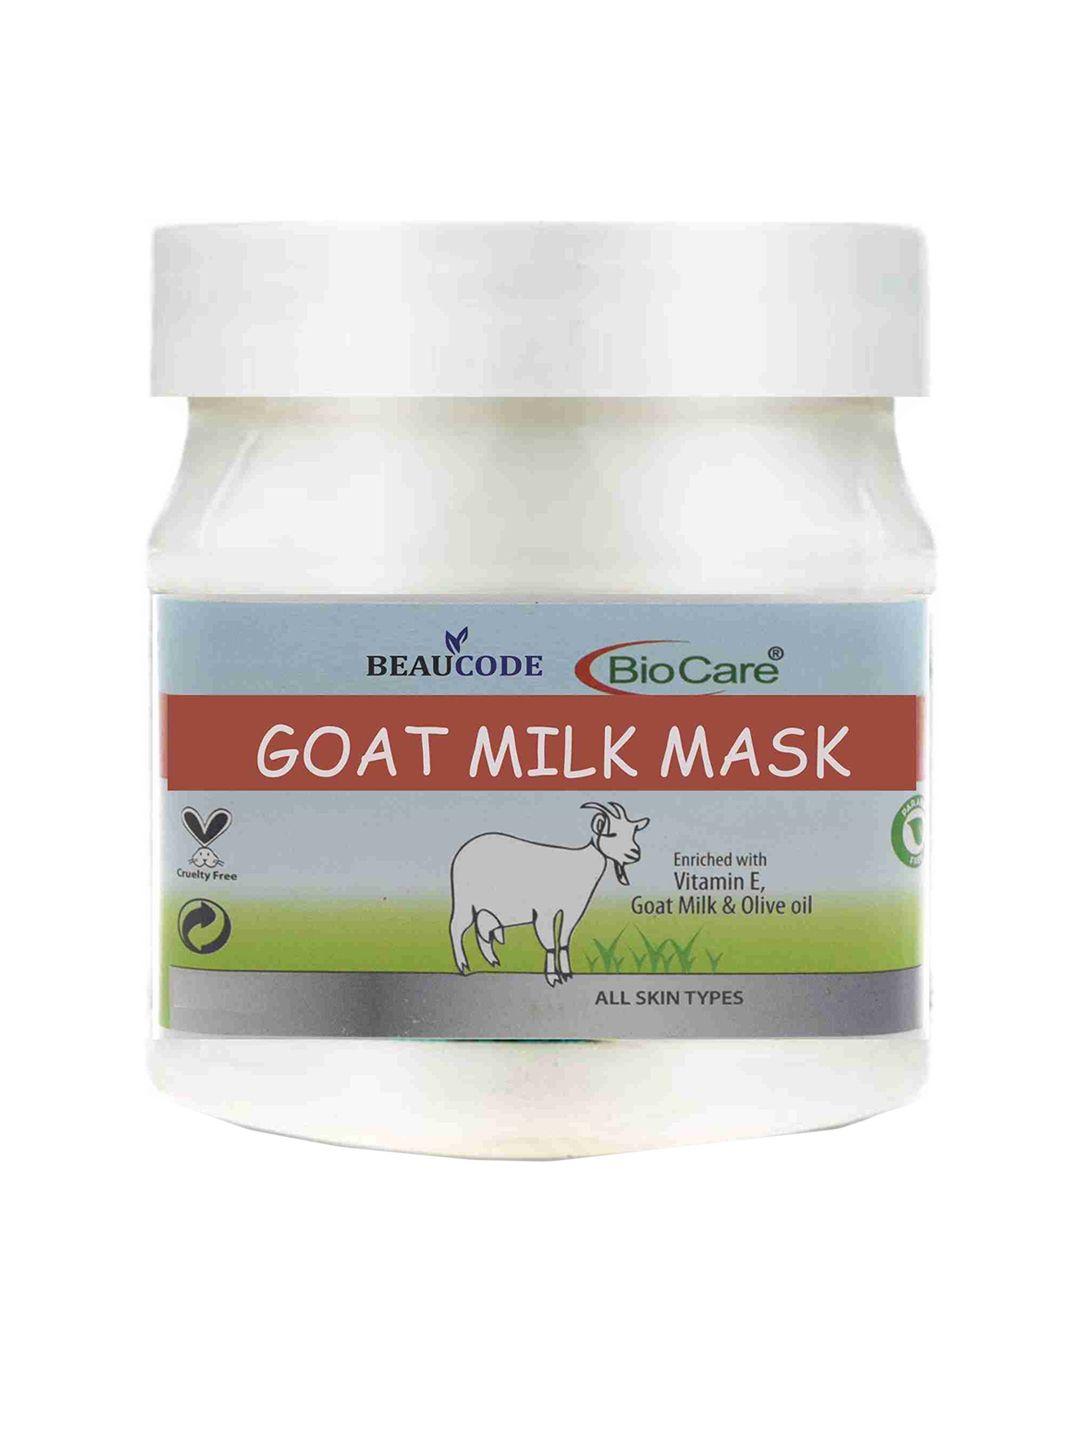 beaucode biocare goat milk face mask with vitamin e & olive oil - 250ml